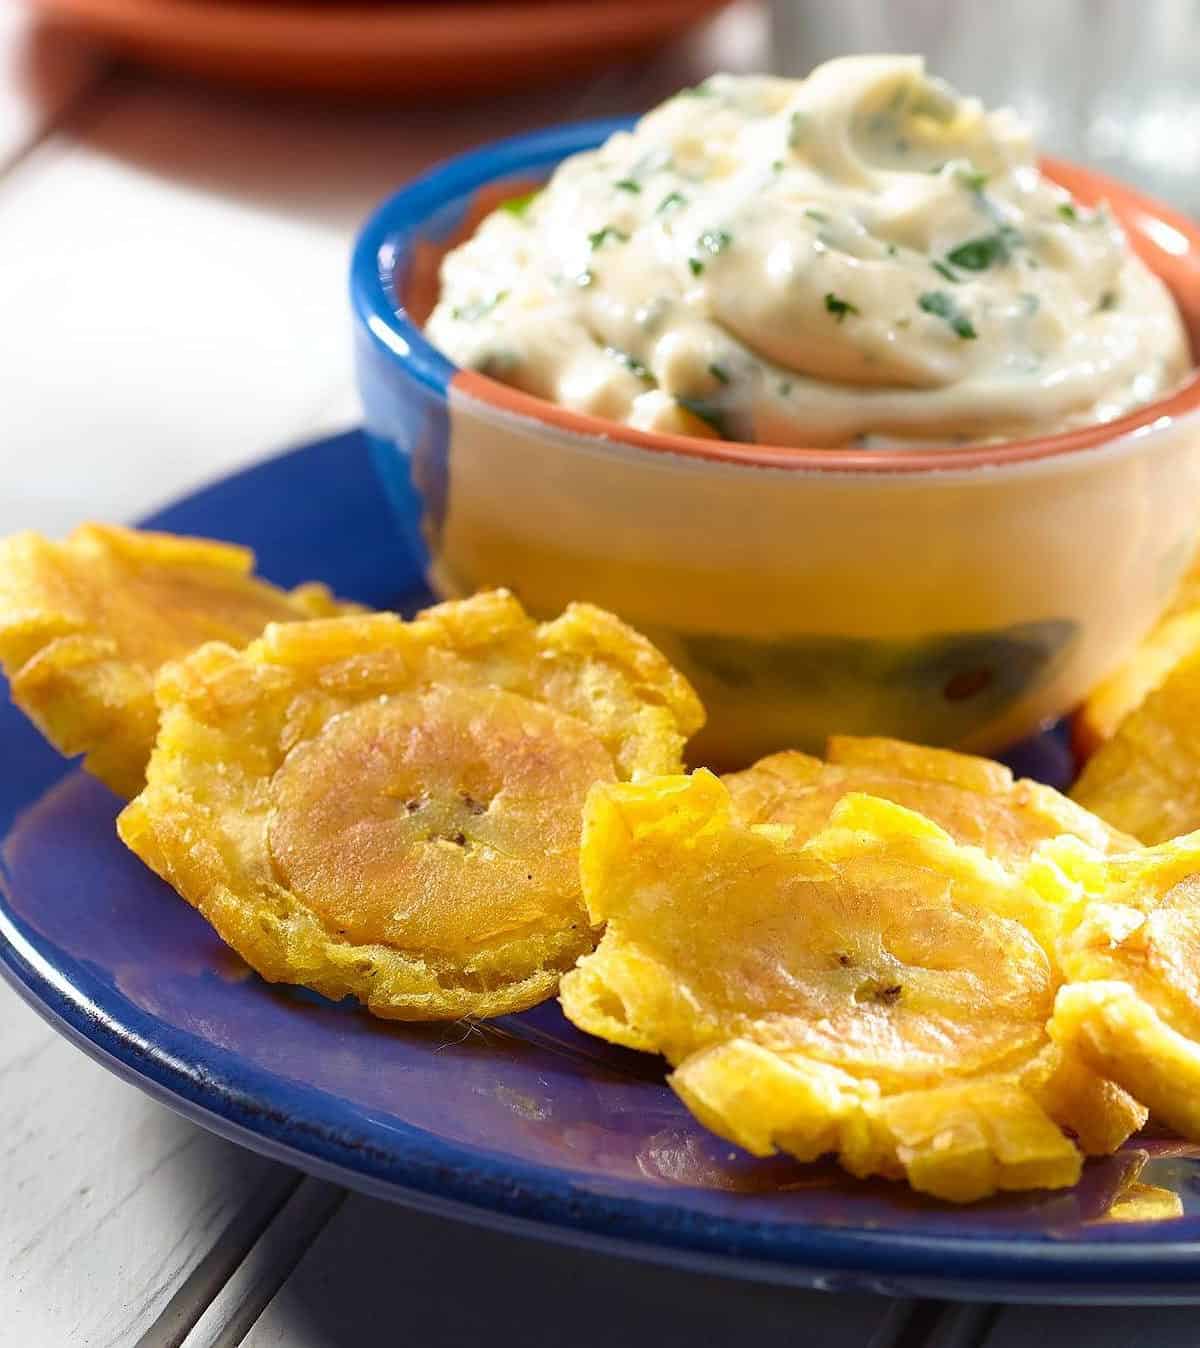  Take a crispy plantain fry, dip it in salsa and cherish the explosion of flavors in your mouth!